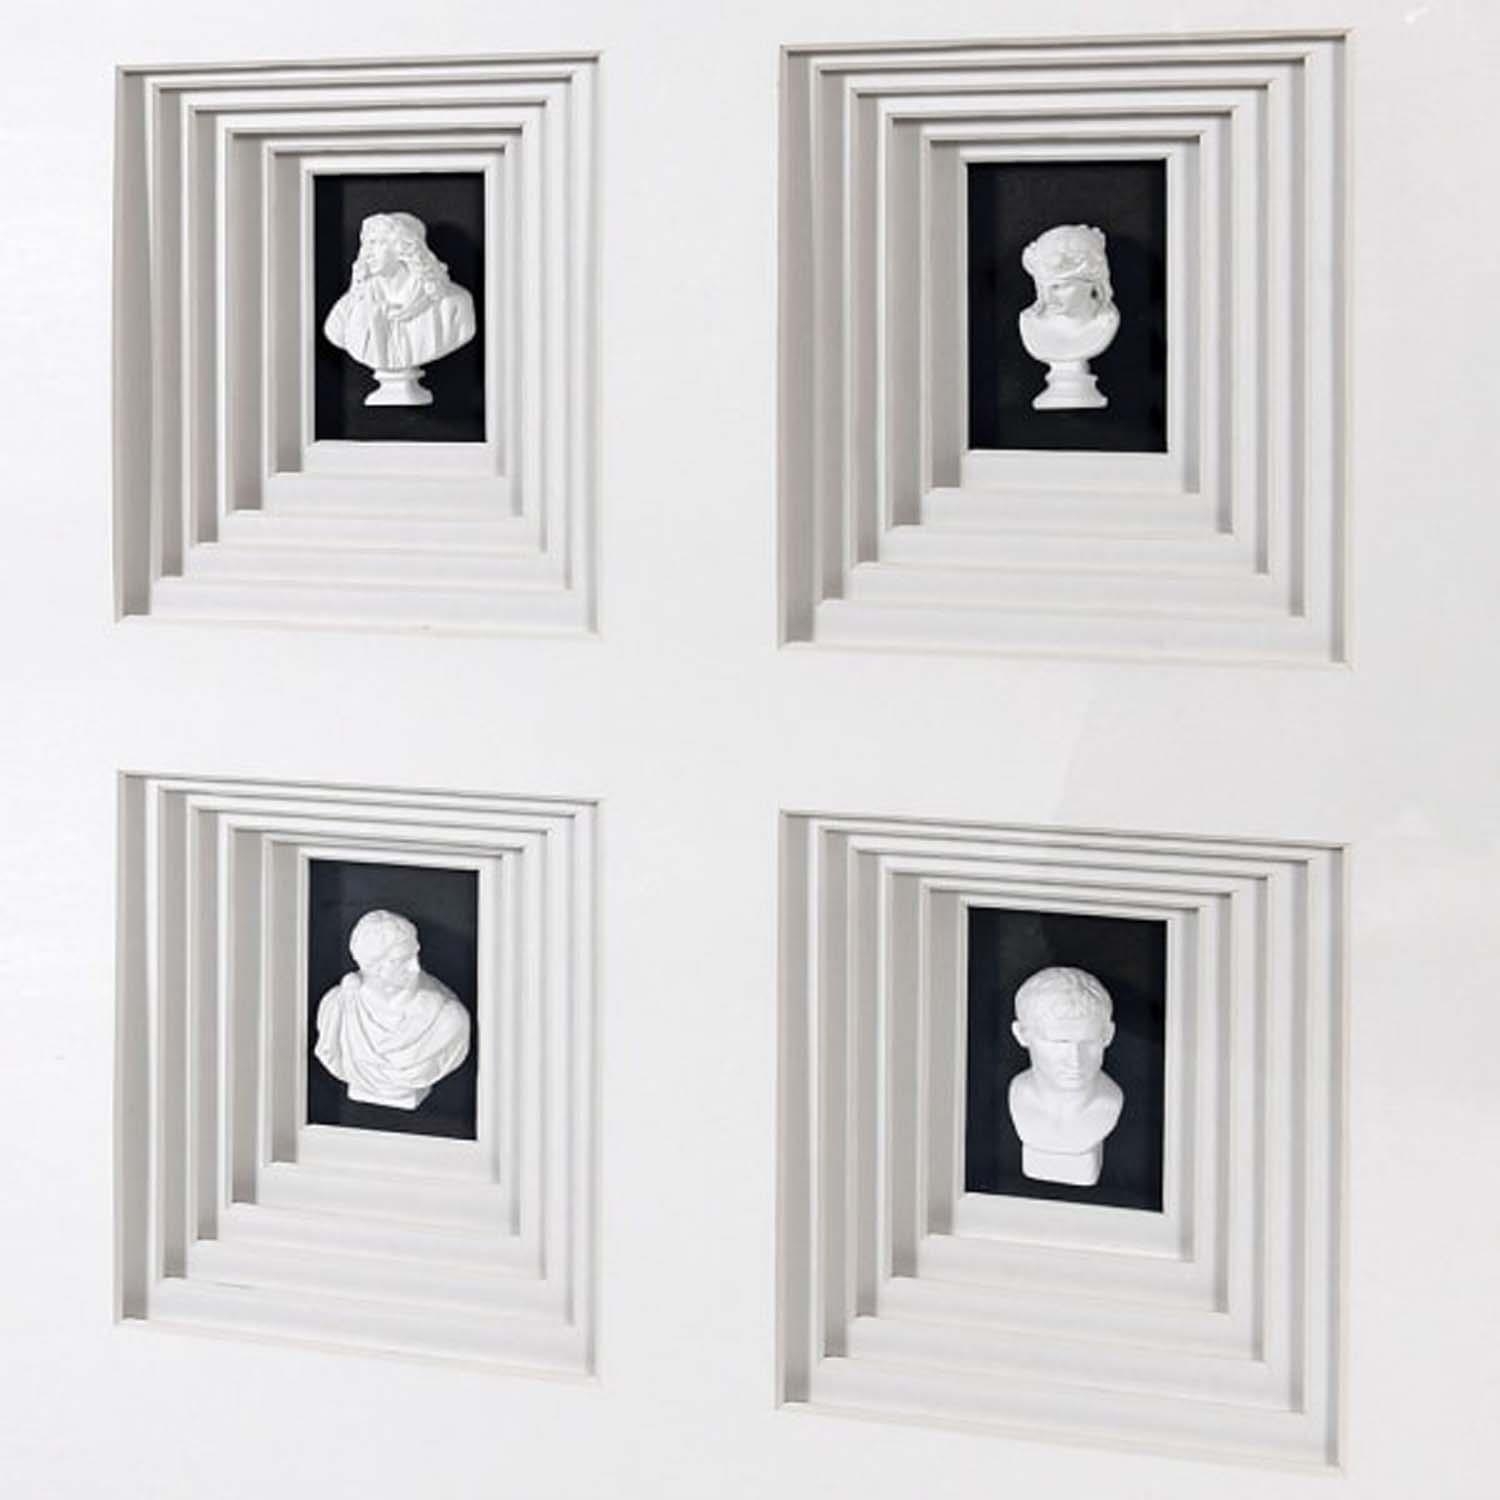 MINIATURE BUST DISPLAY, framed and glazed, 110cm x 100cm. - Image 2 of 2